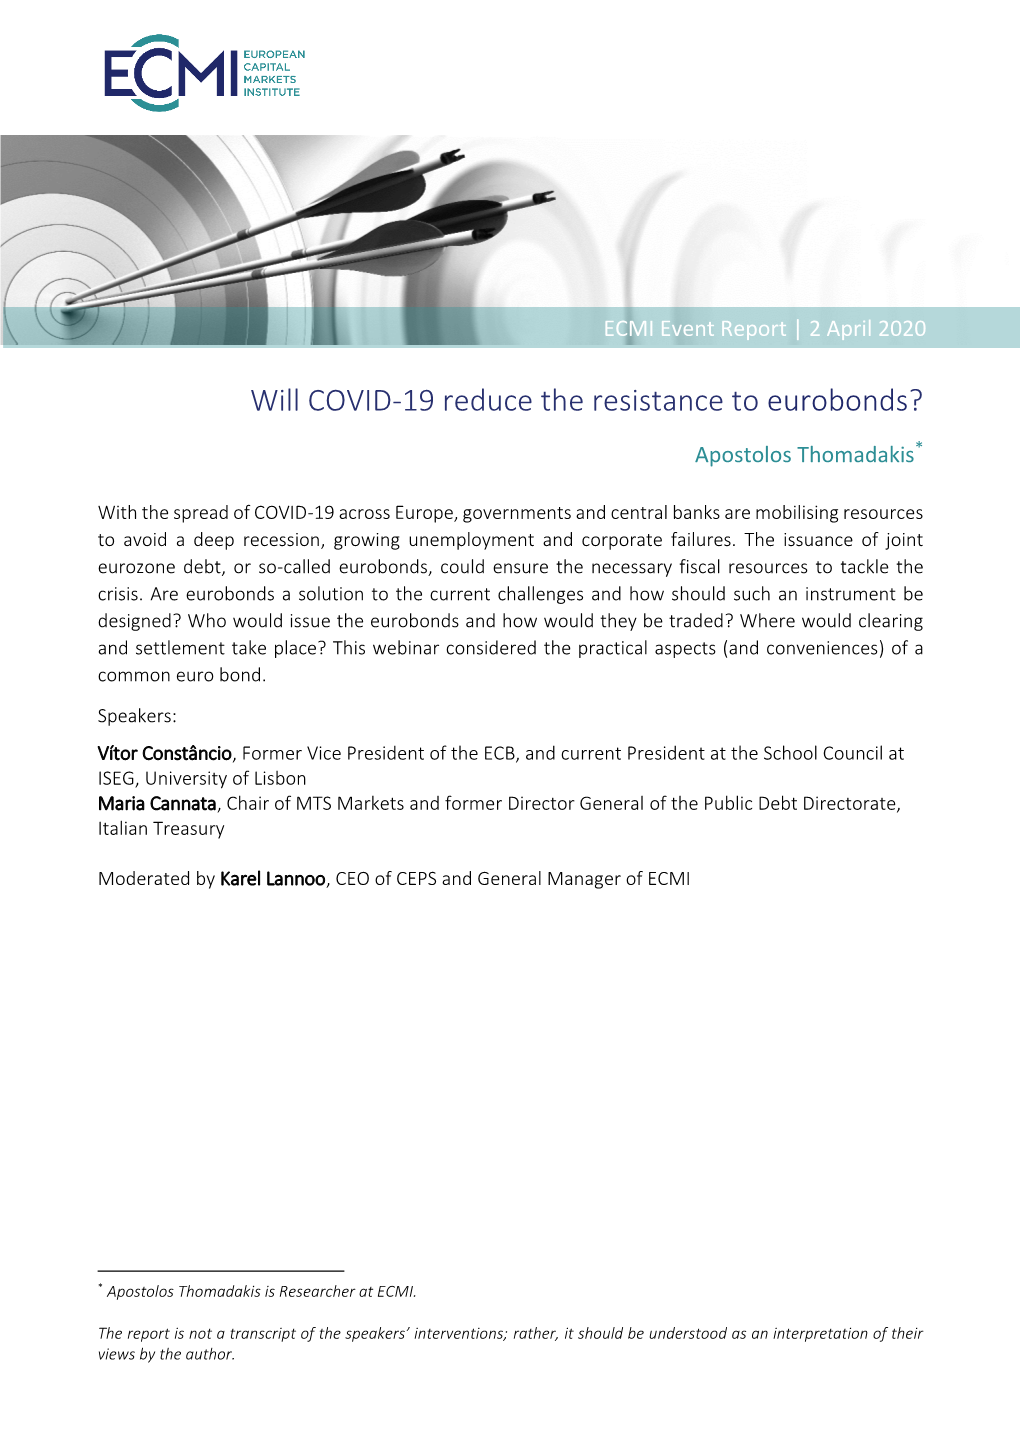 Will COVID-19 Reduce the Resistance to Eurobonds?